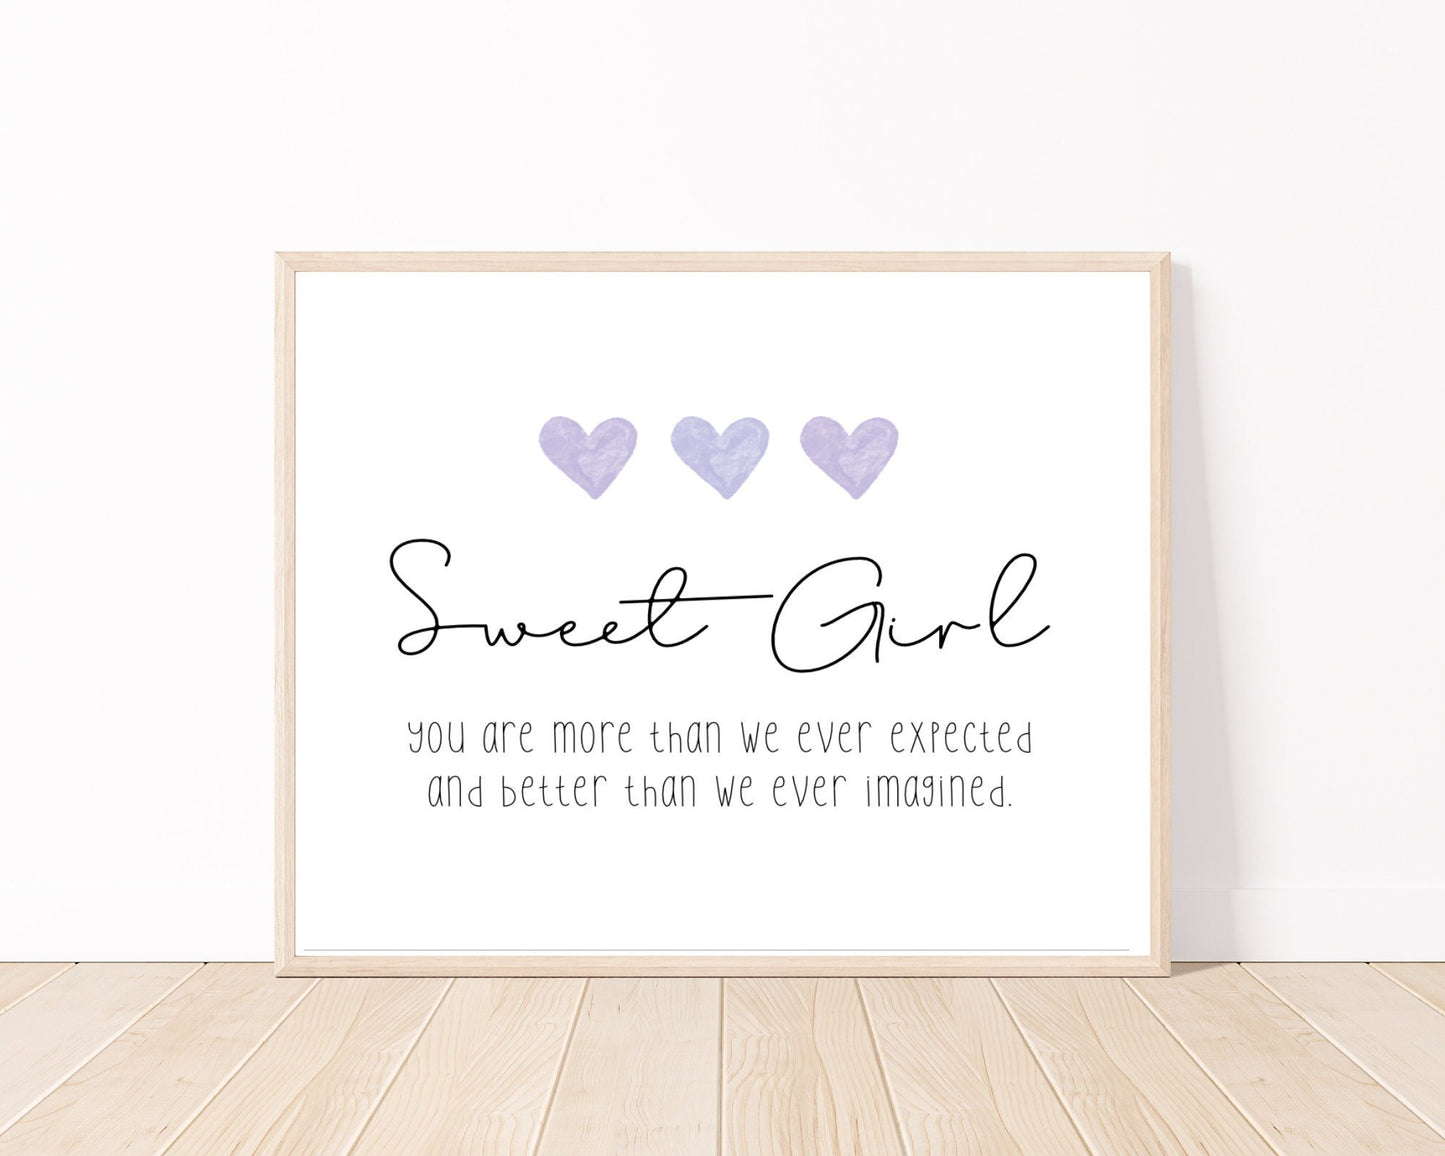 A little girl’s room digital print placed on a white wall and parquet flooring that has three purple hearts at the top, and a piece of writing that says: “Sweet girl, you are more than we ever expected and better than we ever imagined.”